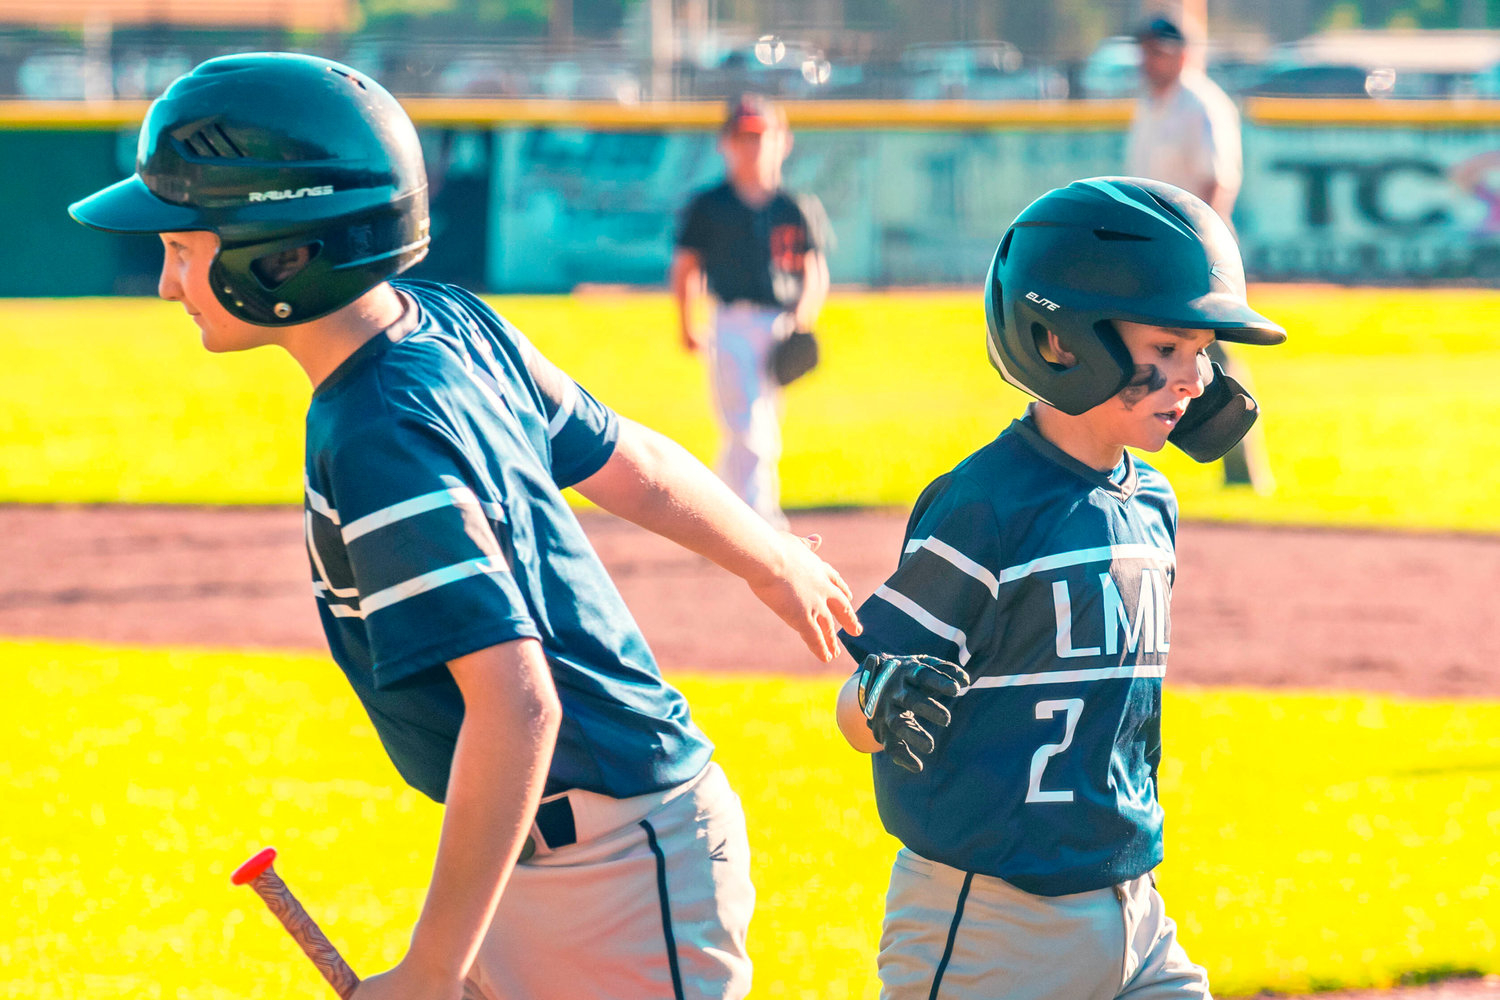 Bentley Alsonso is greeted by fellow players while returning to the dugout after scoring Thursday during the 10U Little League District 3 Championship game against Centralia.